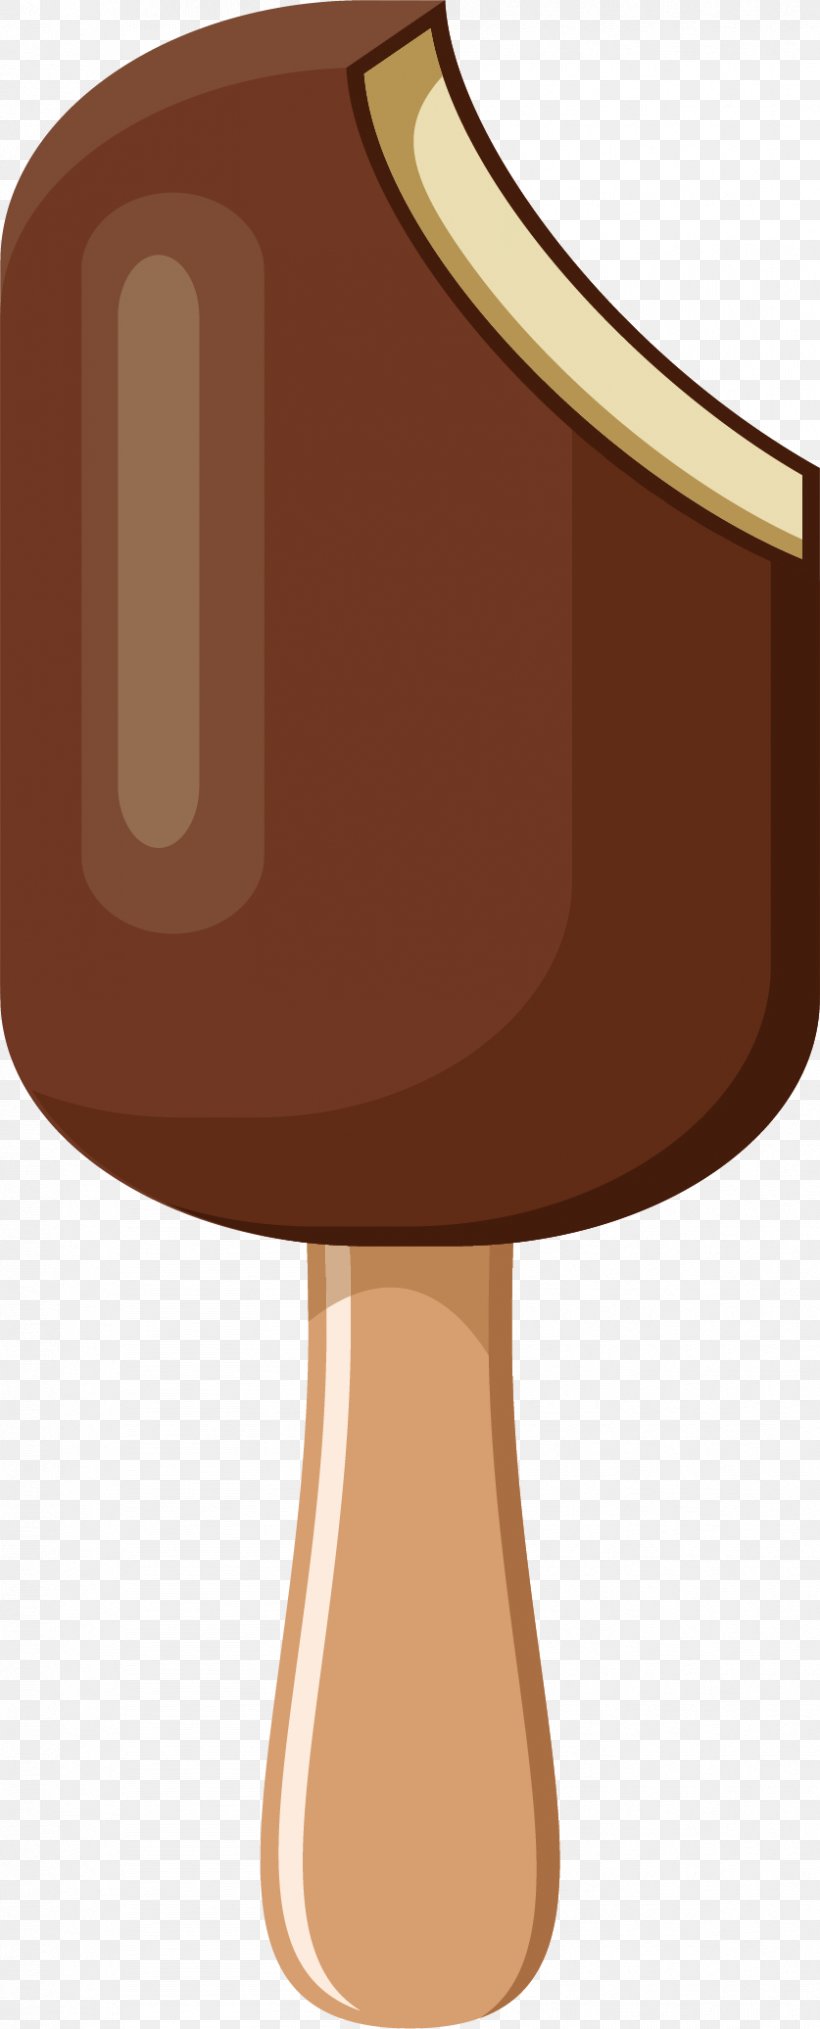 Chocolate Ice Cream Ganache Caramel Color, PNG, 837x2072px, Ice Cream, Brown, Caramel, Caramel Color, Chocolate Download Free